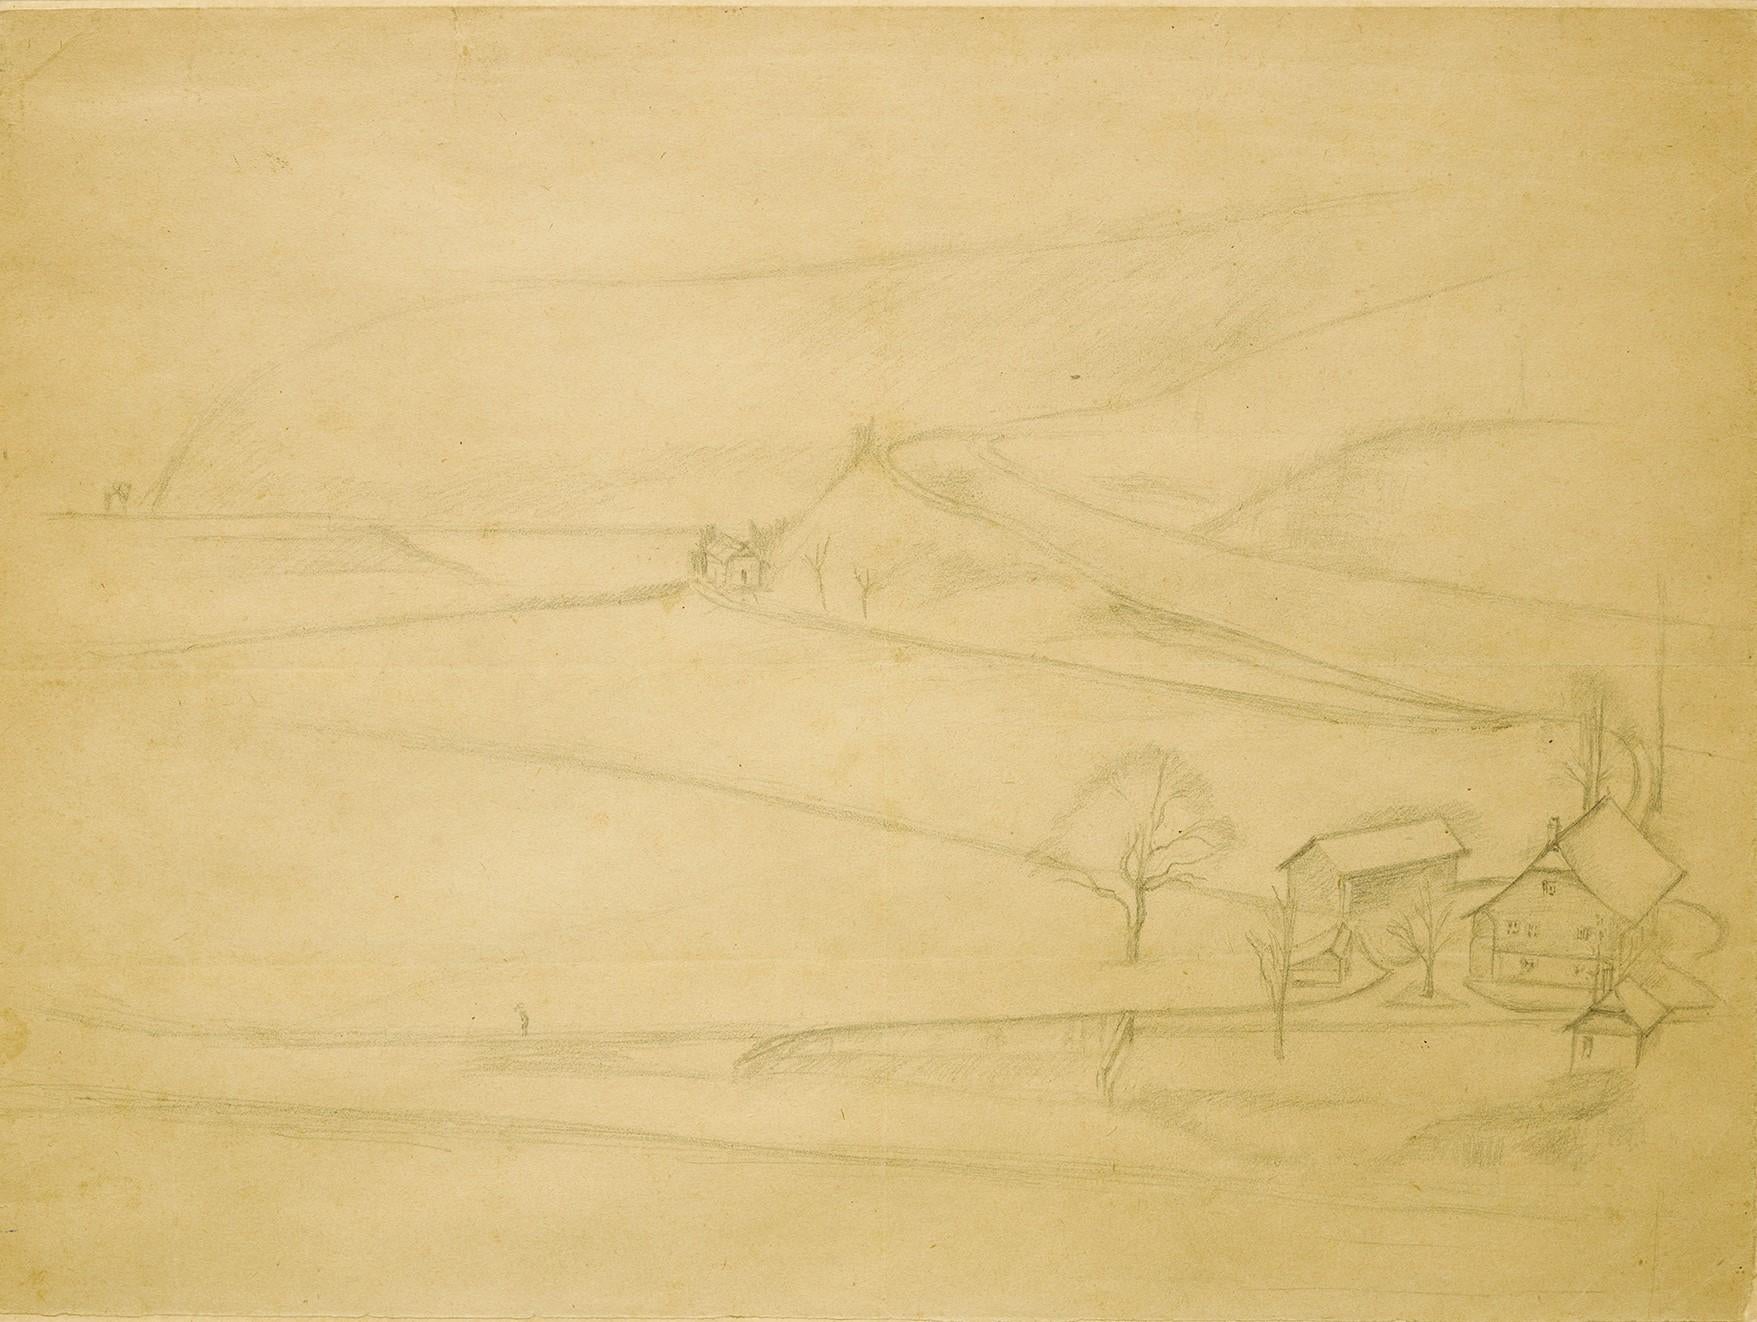 Balthus (Balthasar Klossowski de Rola) - Study for « Paysage de Fribourg » - 1943 a drawing by Balthus (1908 photo